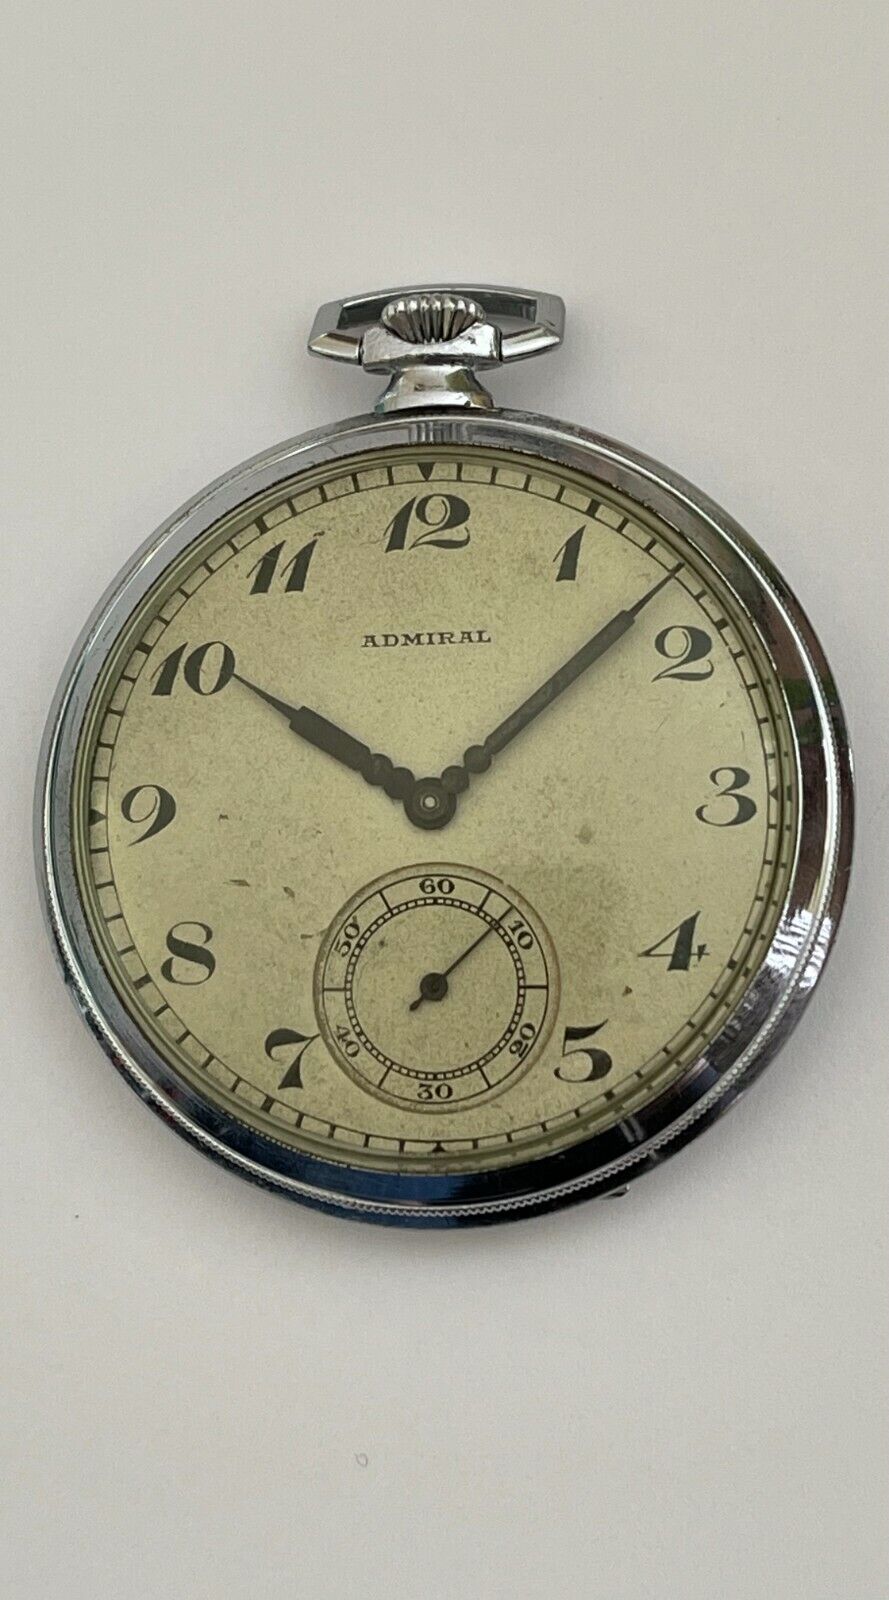 Antique Vintage ADMIRAL Pocket watch Swiss made 15 Jewels Amazing Movement